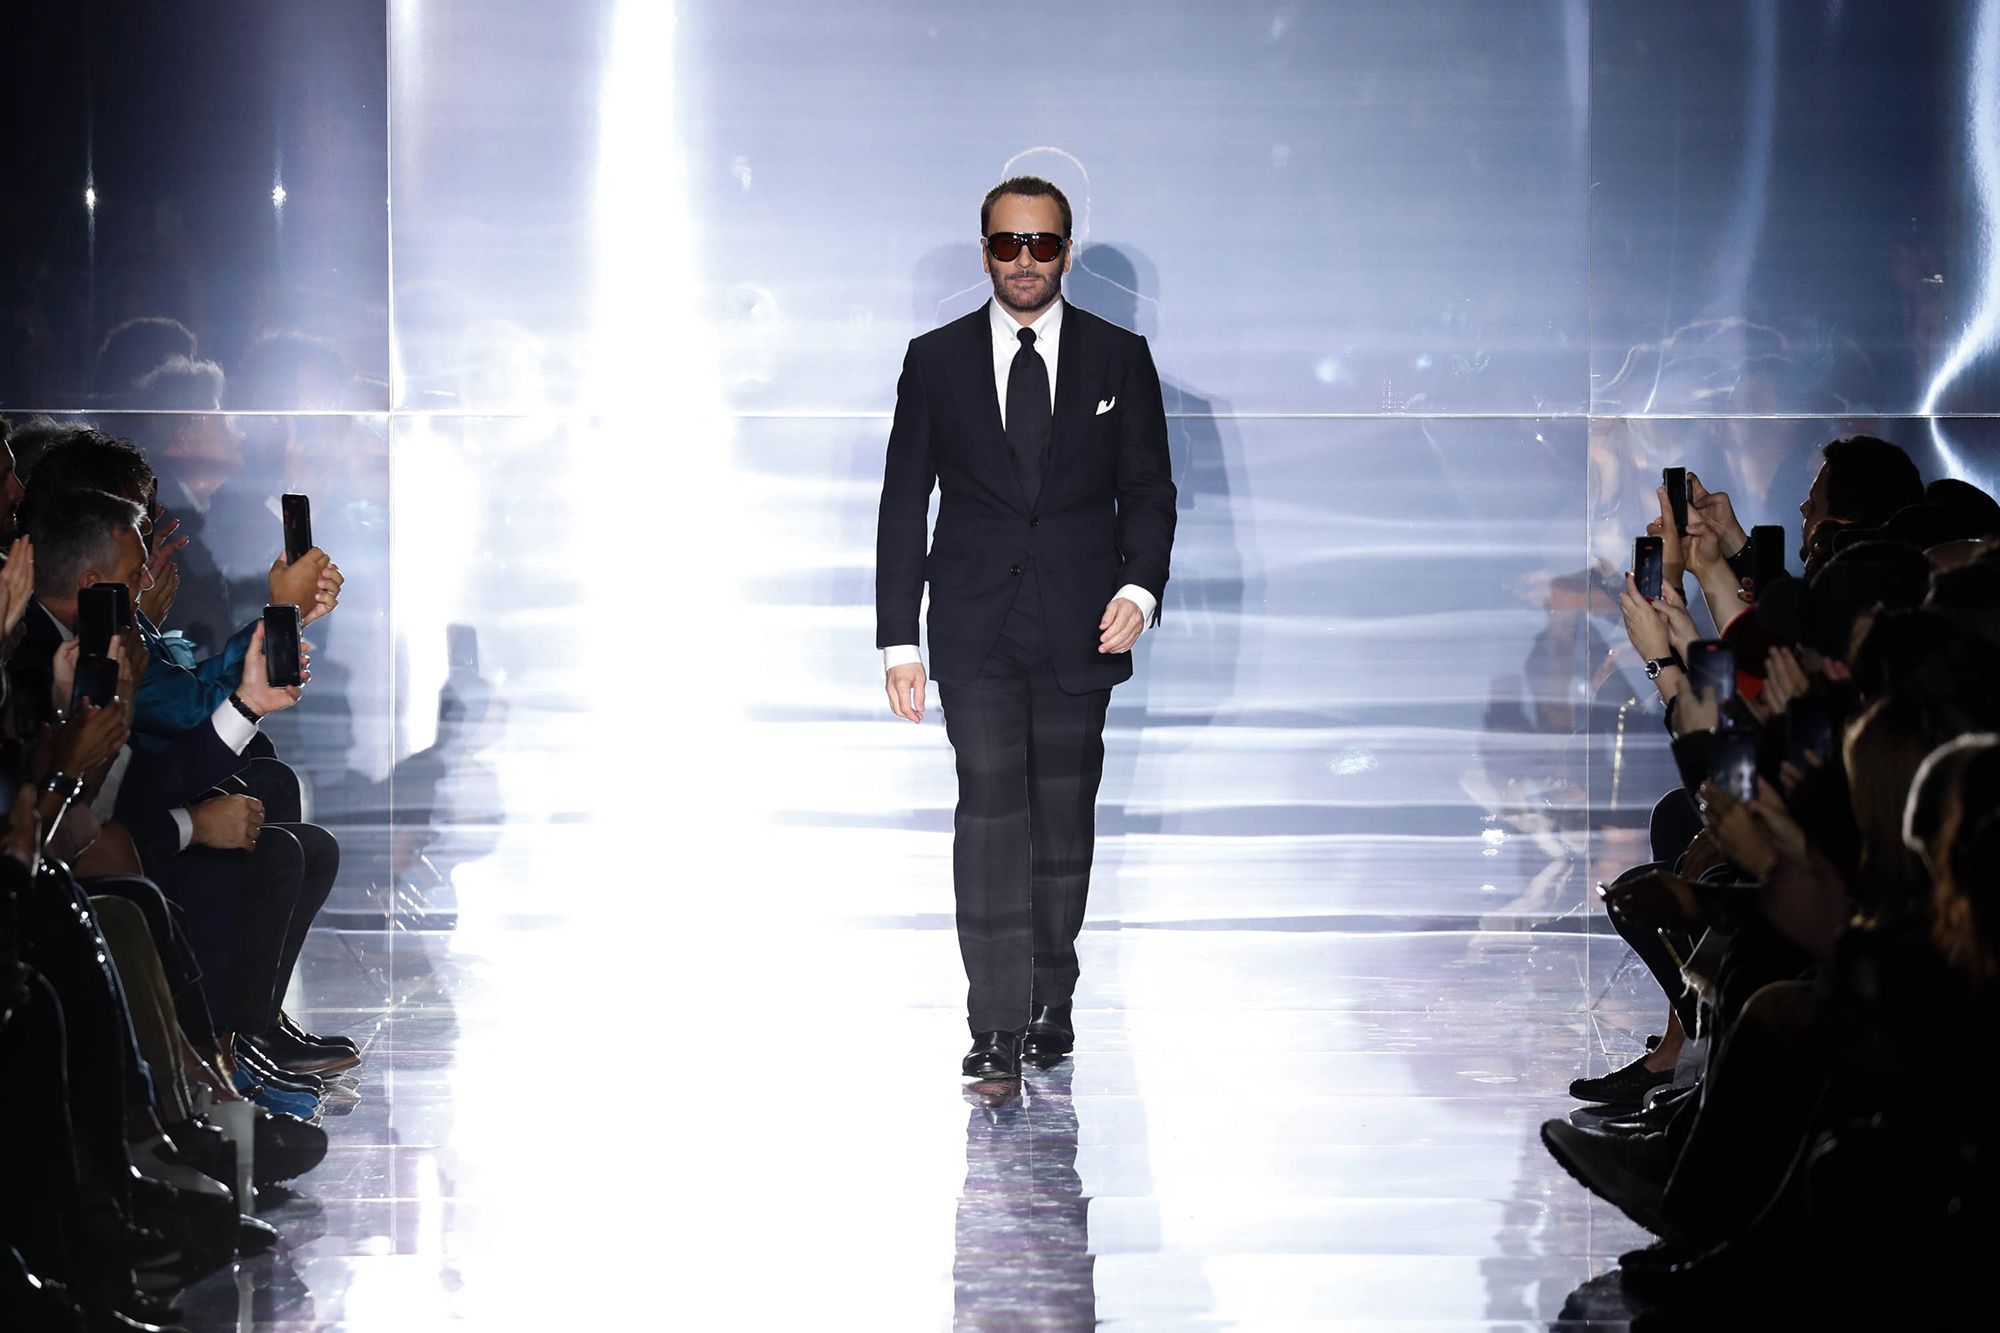 Tom Ford in L.A.? It fits  Tom ford shirts, Tom ford sunglasses